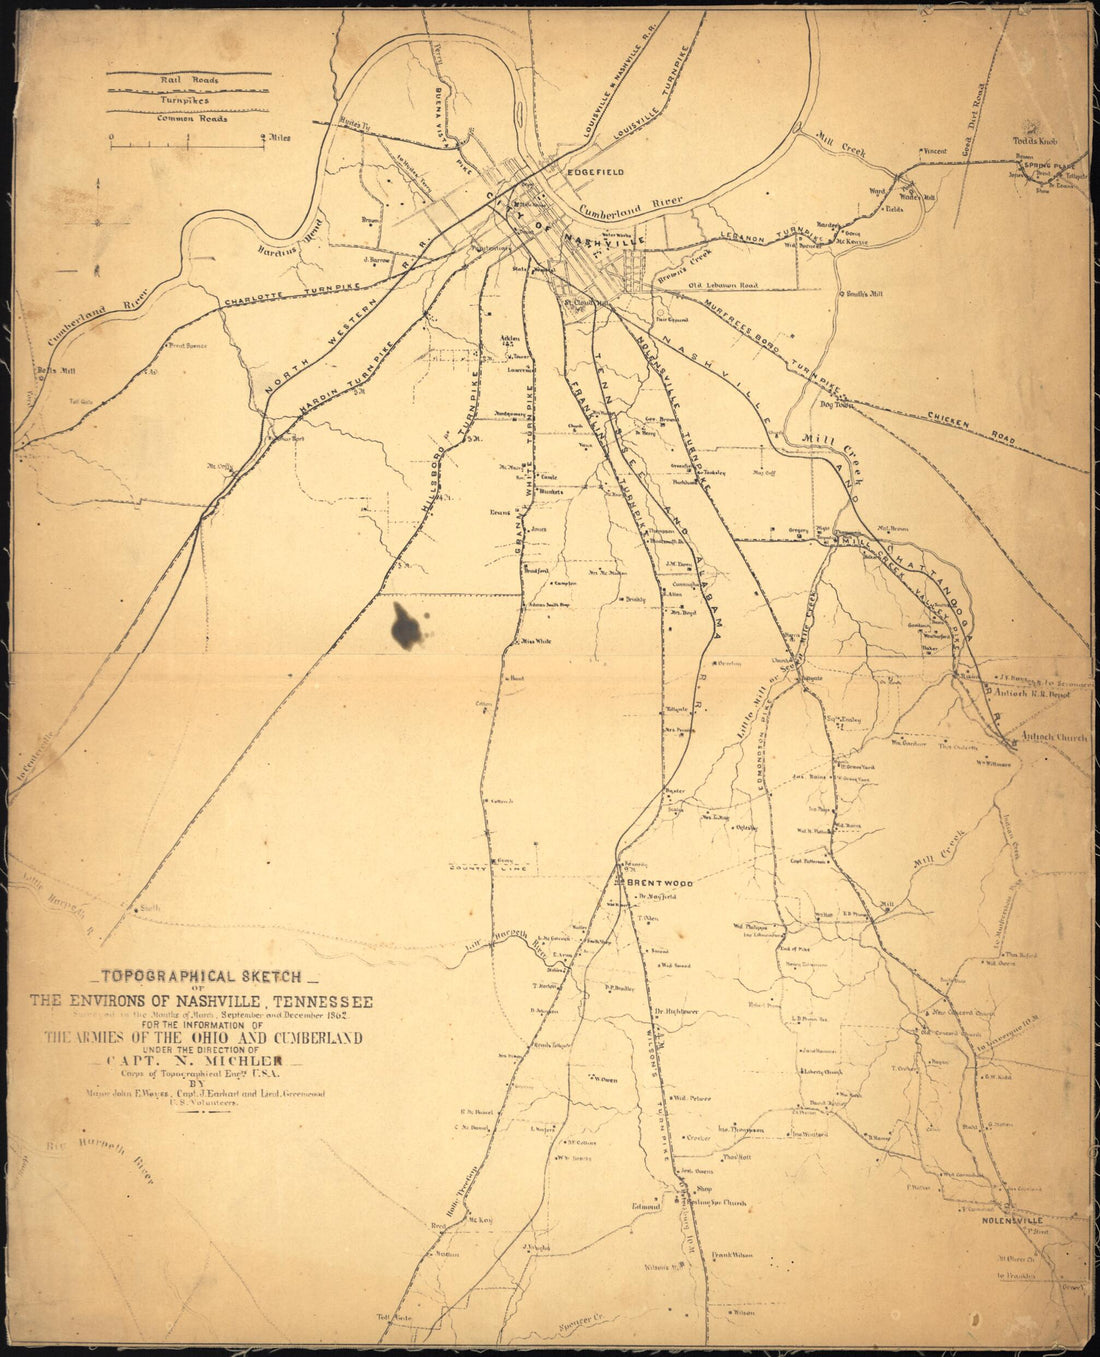 This old map of Topographical Sketch of the Environs of Nashville, Tennessee from 1862 was created by N. (Nathaniel) Michler, J. E. Weyss in 1862